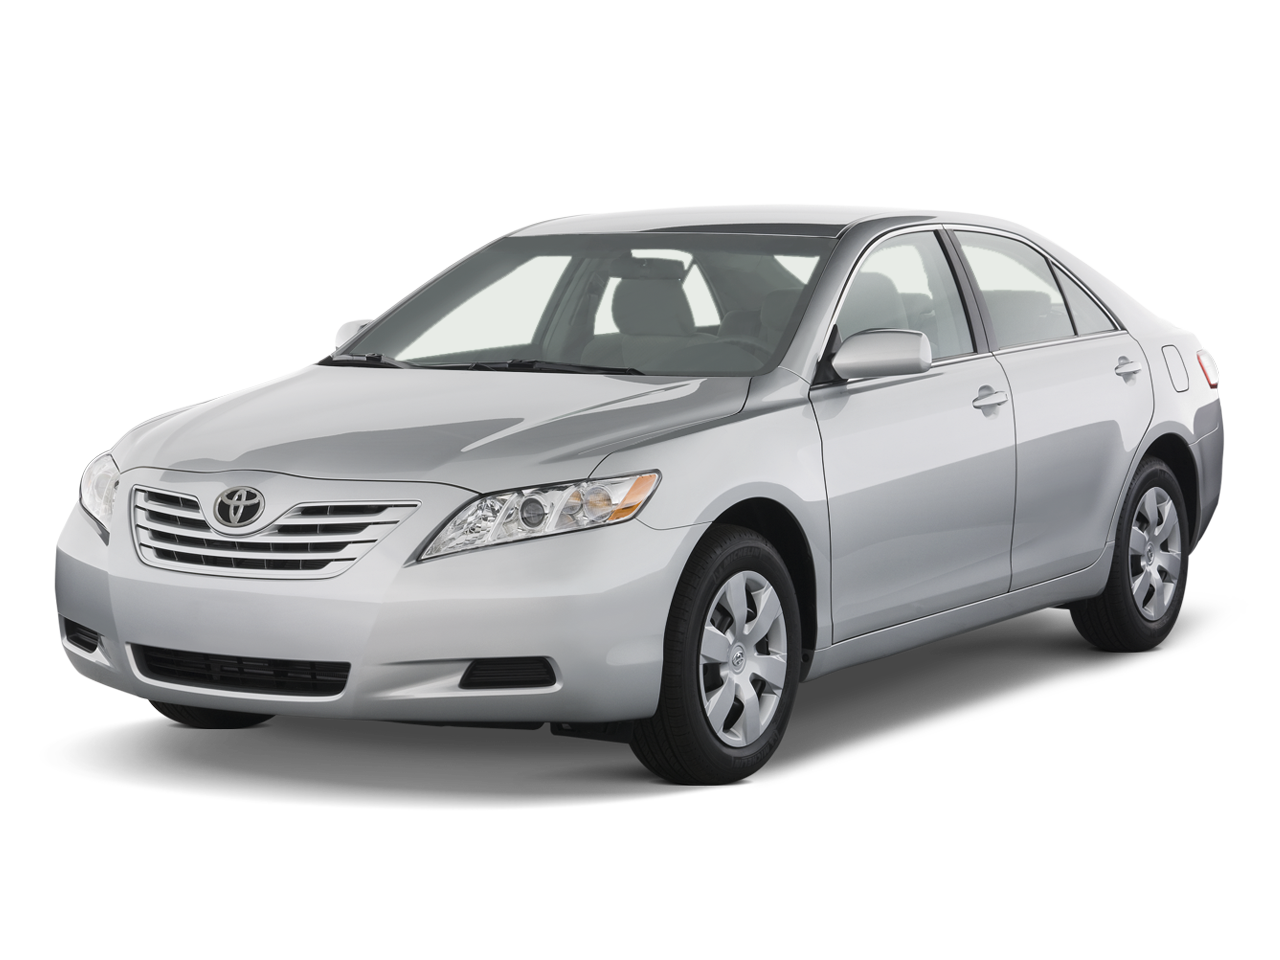 2008 Toyota Camry Prices, Reviews, and Photos - MotorTrend